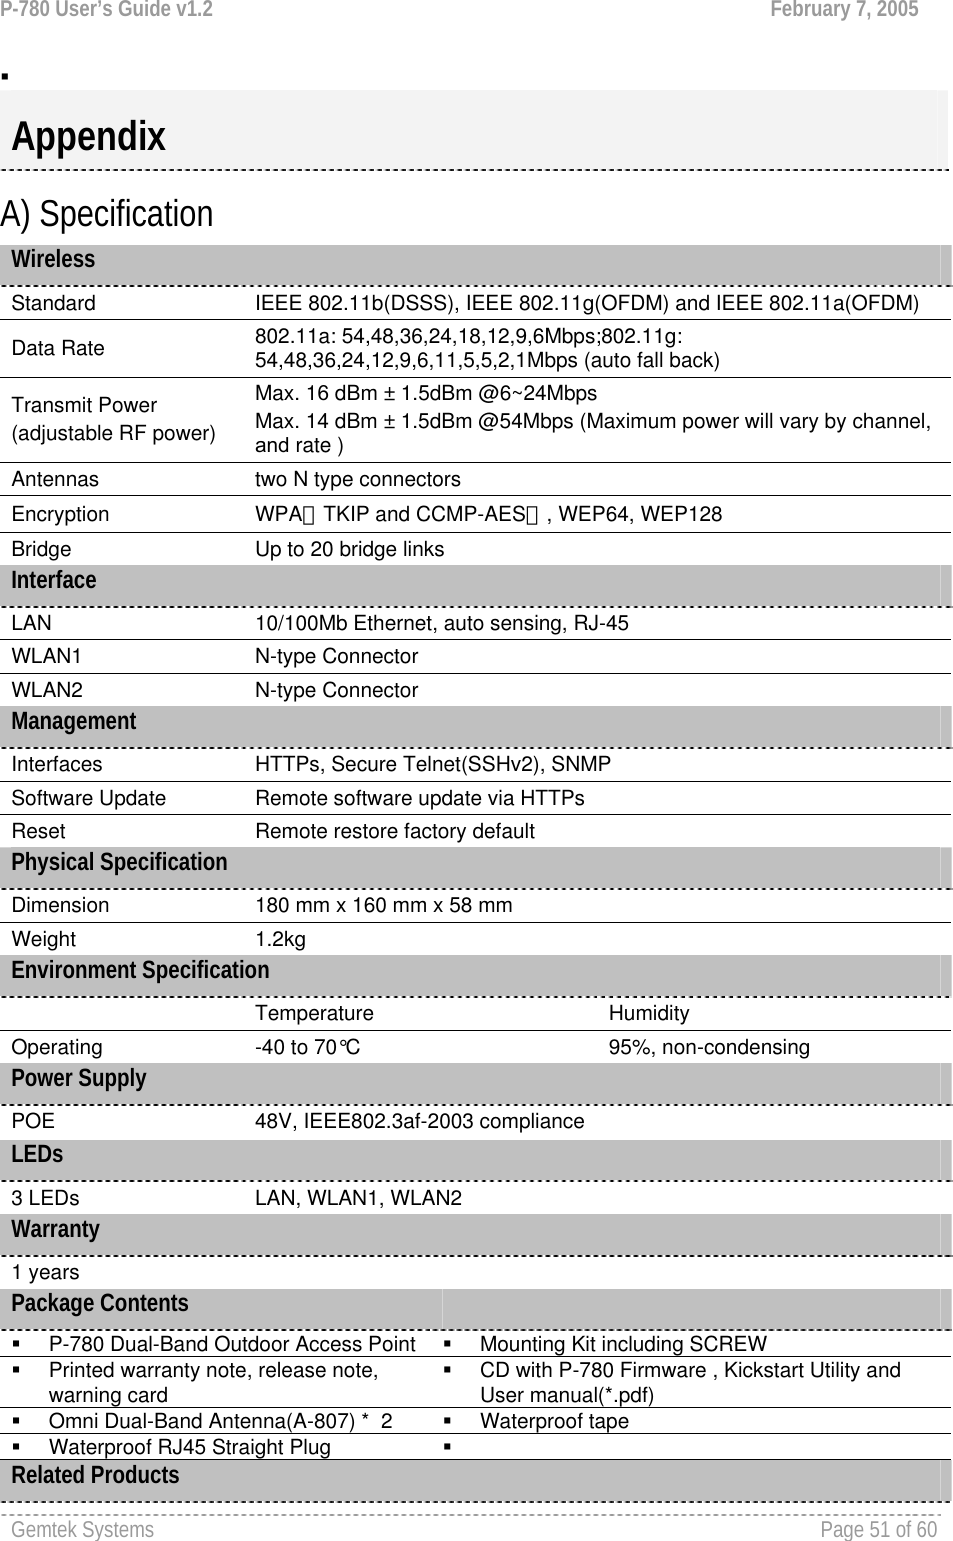 P-780 User’s Guide v1.2  February 7, 2005 Gemtek Systems    Page 51 of 60     A) Specification Wireless Standard  IEEE 802.11b(DSSS), IEEE 802.11g(OFDM) and IEEE 802.11a(OFDM) Data Rate  802.11a: 54,48,36,24,18,12,9,6Mbps;802.11g: 54,48,36,24,12,9,6,11,5,5,2,1Mbps (auto fall back) Transmit Power (adjustable RF power) Max. 16 dBm ± 1.5dBm @6~24Mbps Max. 14 dBm ± 1.5dBm @54Mbps (Maximum power will vary by channel, and rate ) Antennas  two N type connectors Encryption  WPA（TKIP and CCMP-AES）, WEP64, WEP128 Bridge   Up to 20 bridge links Interface LAN  10/100Mb Ethernet, auto sensing, RJ-45 WLAN1  N-type Connector WLAN2  N-type Connector Management Interfaces  HTTPs, Secure Telnet(SSHv2), SNMP Software Update  Remote software update via HTTPs Reset  Remote restore factory default Physical Specification Dimension   180 mm x 160 mm x 58 mm  Weight  1.2kg Environment Specification  Temperature  Humidity Operating  -40 to 70°C  95%, non-condensing Power Supply POE  48V, IEEE802.3af-2003 compliance LEDs 3 LEDs  LAN, WLAN1, WLAN2   Warranty 1 years Package Contents     P-780 Dual-Band Outdoor Access Point   Mounting Kit including SCREW   Printed warranty note, release note, warning card   CD with P-780 Firmware , Kickstart Utility and User manual(*.pdf)   Omni Dual-Band Antenna(A-807) *  2   Waterproof tape   Waterproof RJ45 Straight Plug    Related Products Appendix 